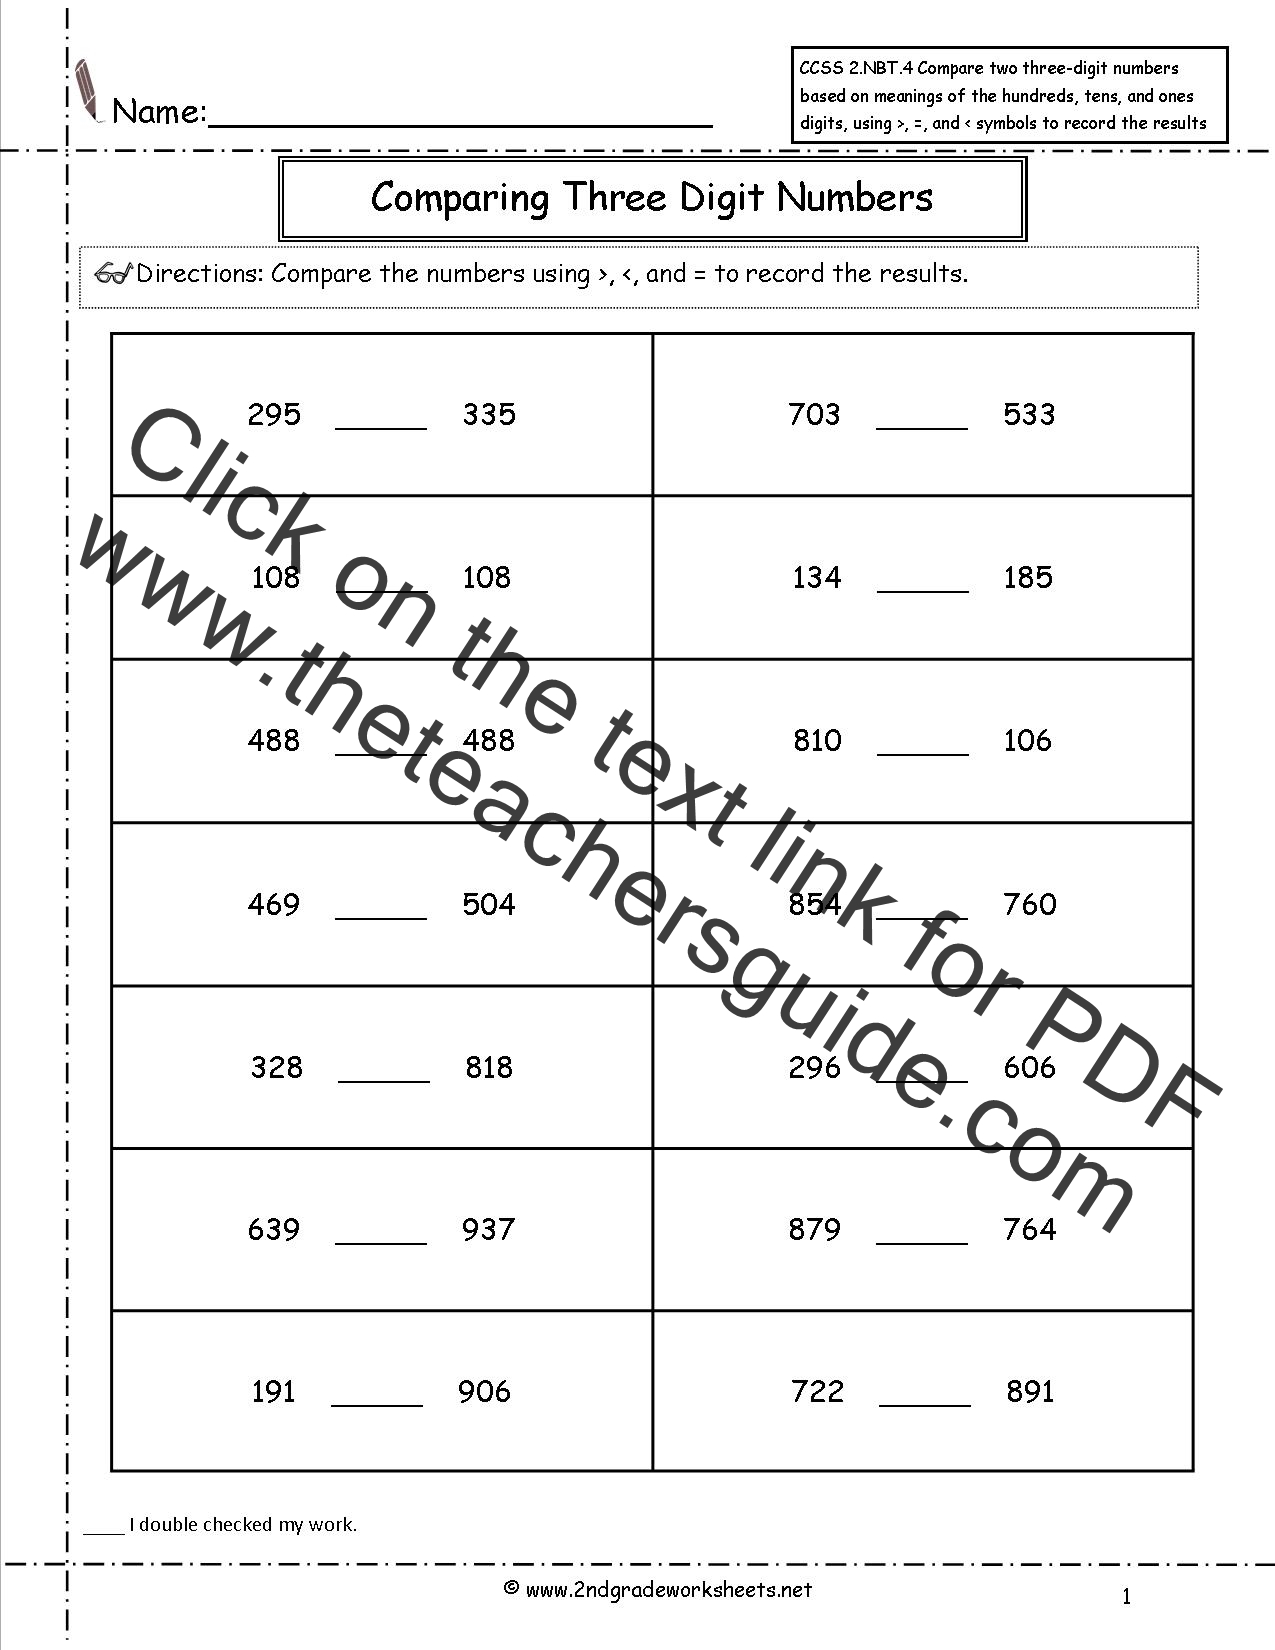 ccss-2-nbt-4-worksheets-comparing-three-digit-numbers